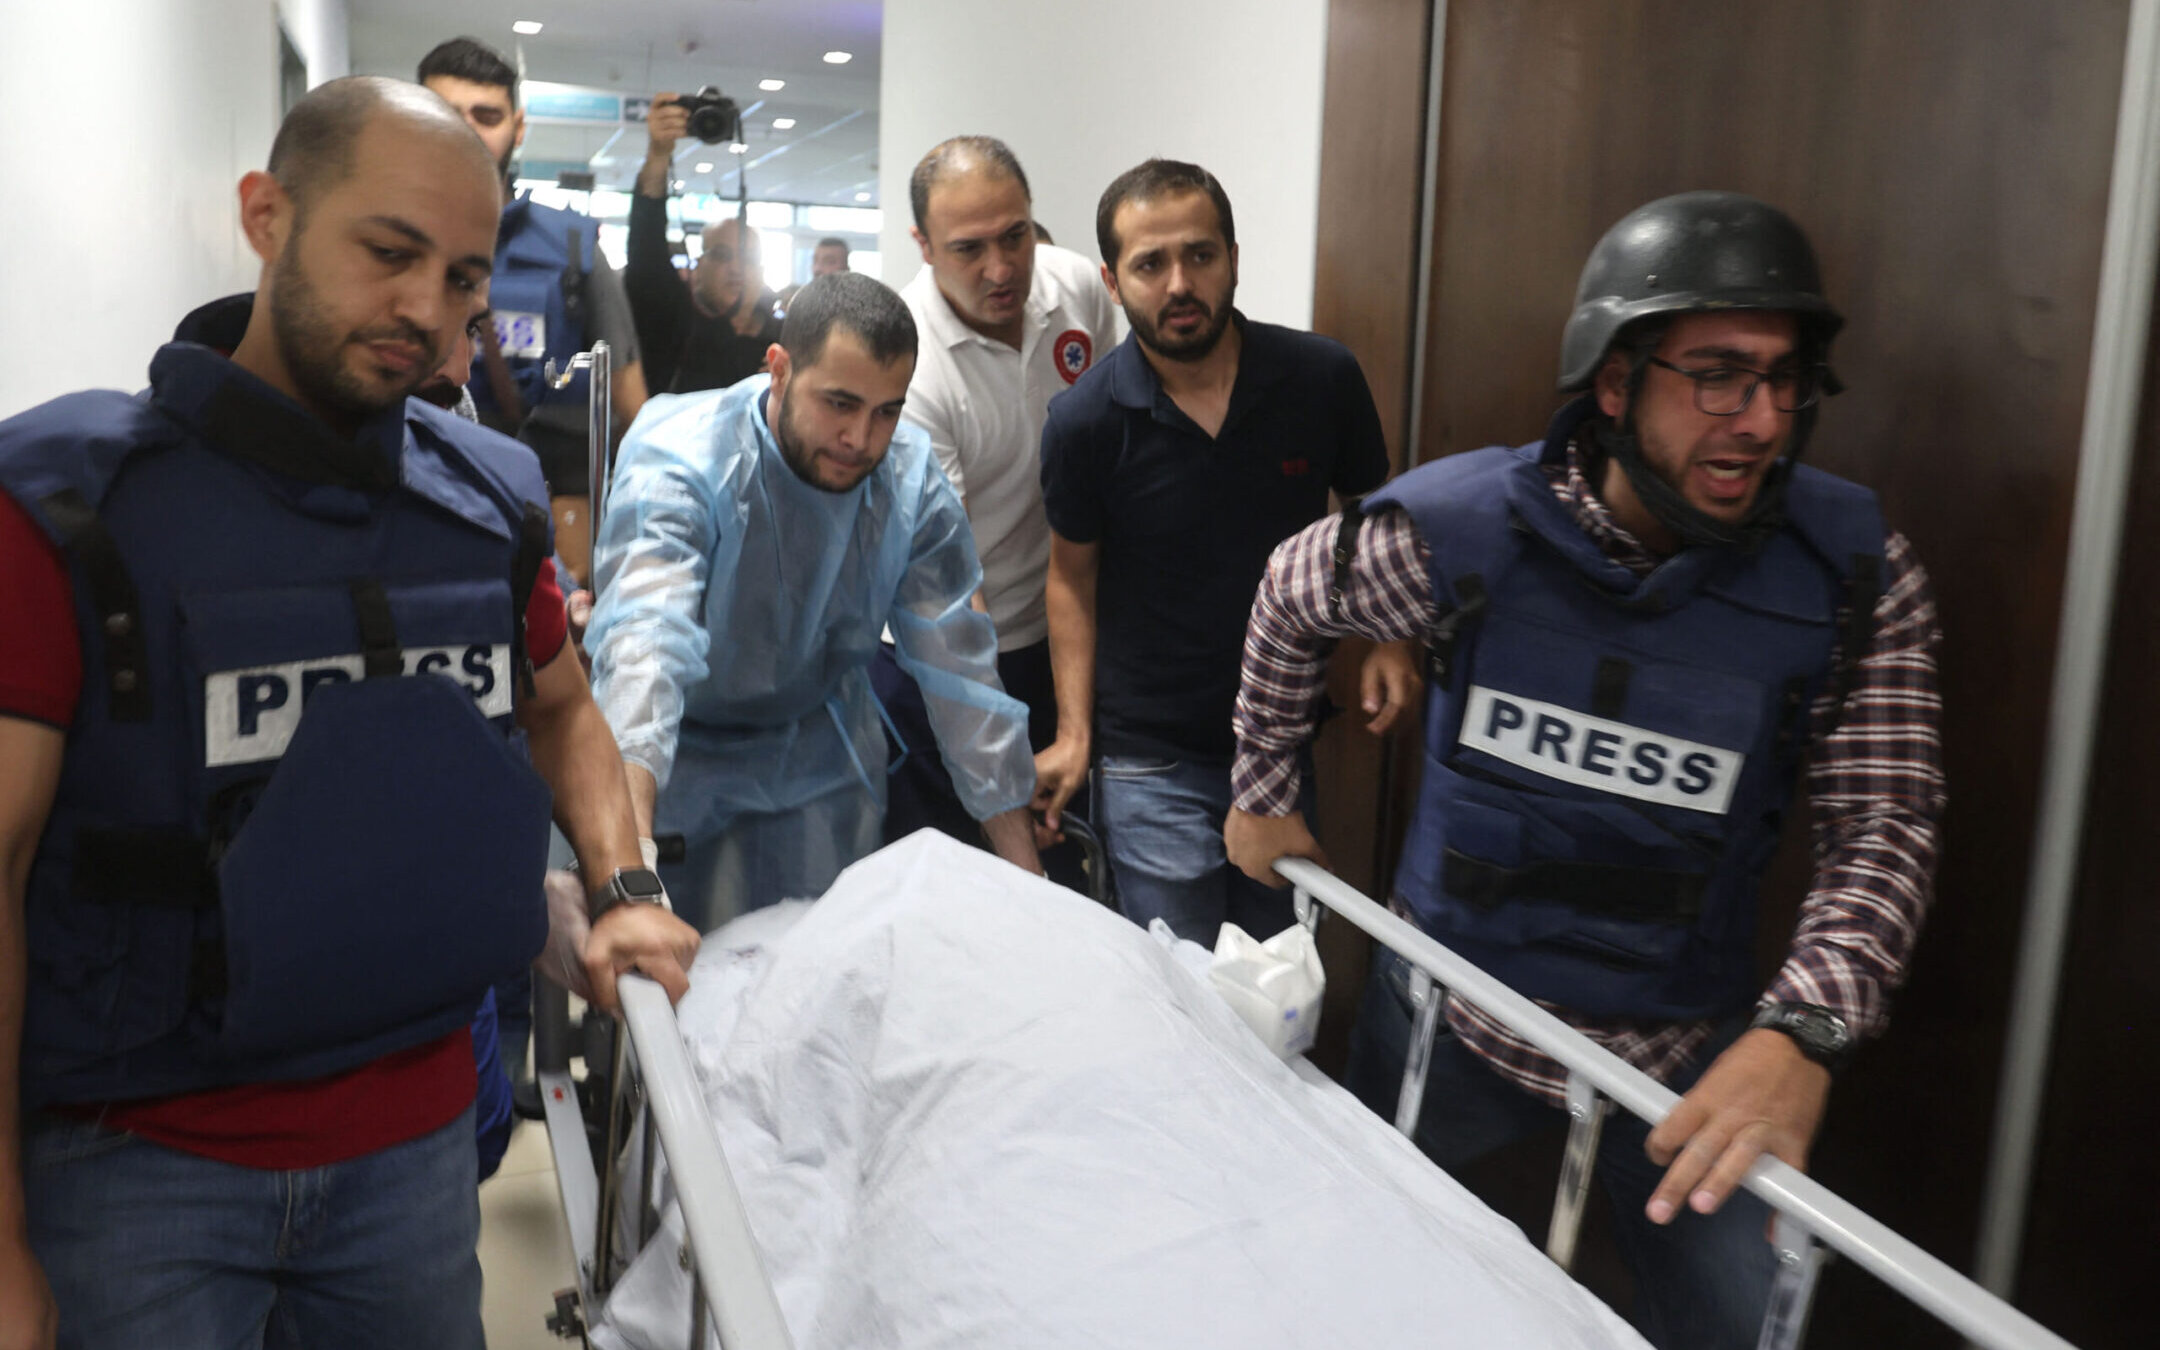 Mujahed al-Saadi, a cameraman for Palestine Today TV, escorts the body of veteran Al-Jazeera reporter Shireen Abu Akleh, who was shot and killed as she covered a raid on the West Bank’s Jenin refugee camp, May 11, 2022, at the hospital in Jenin.(Jaafar Ashtiyeh/AFP via Getty Images)